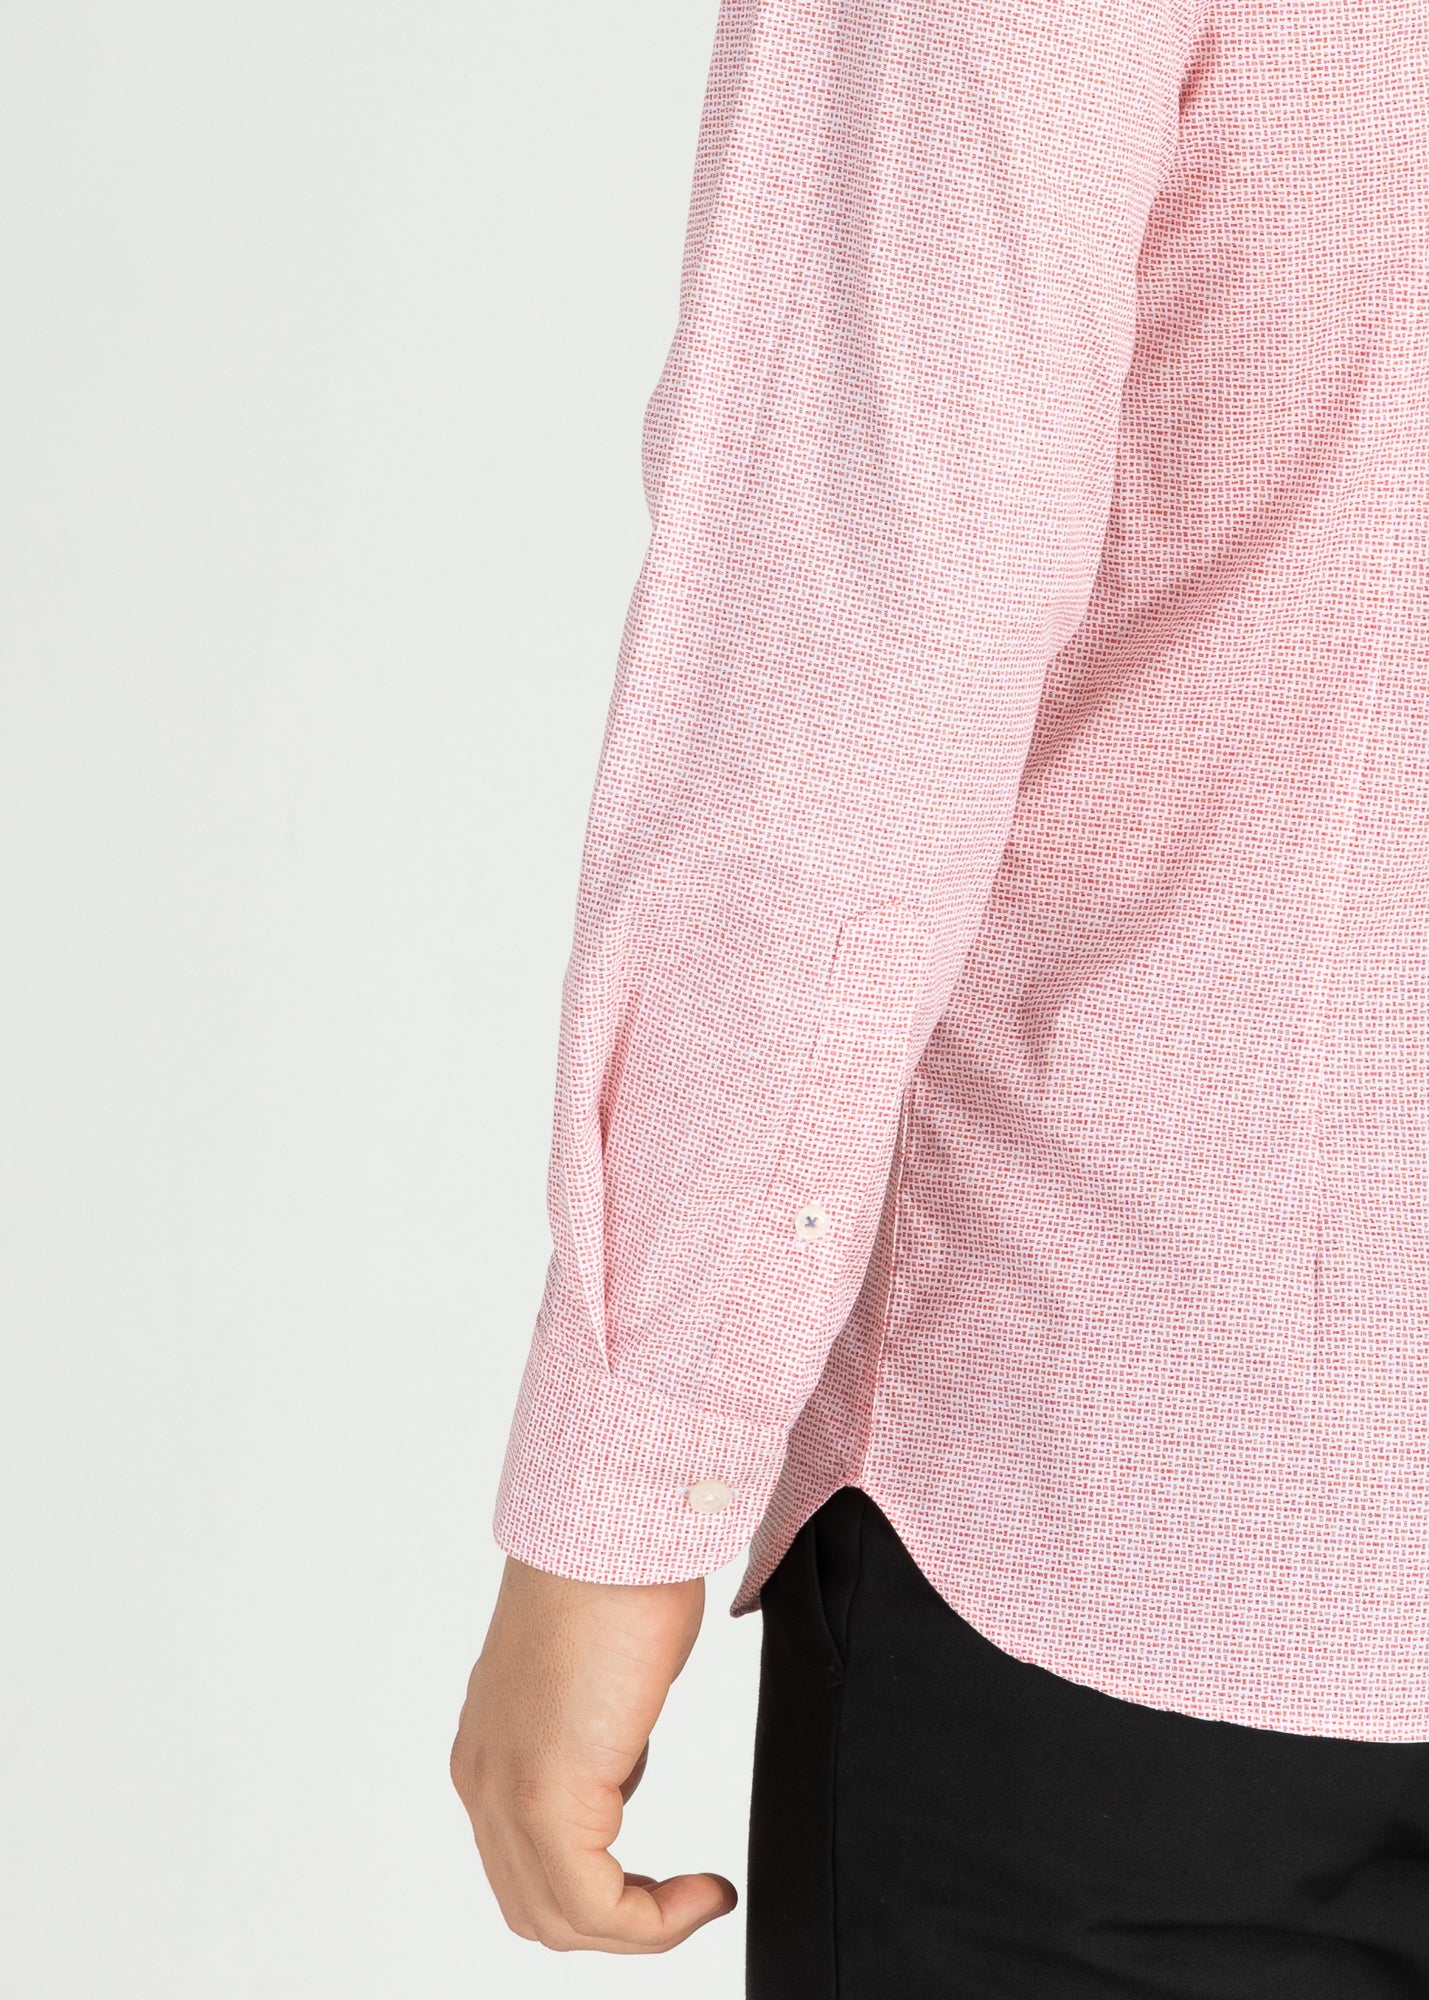 Wharton Printed Shirt with Inner Contrast Detail